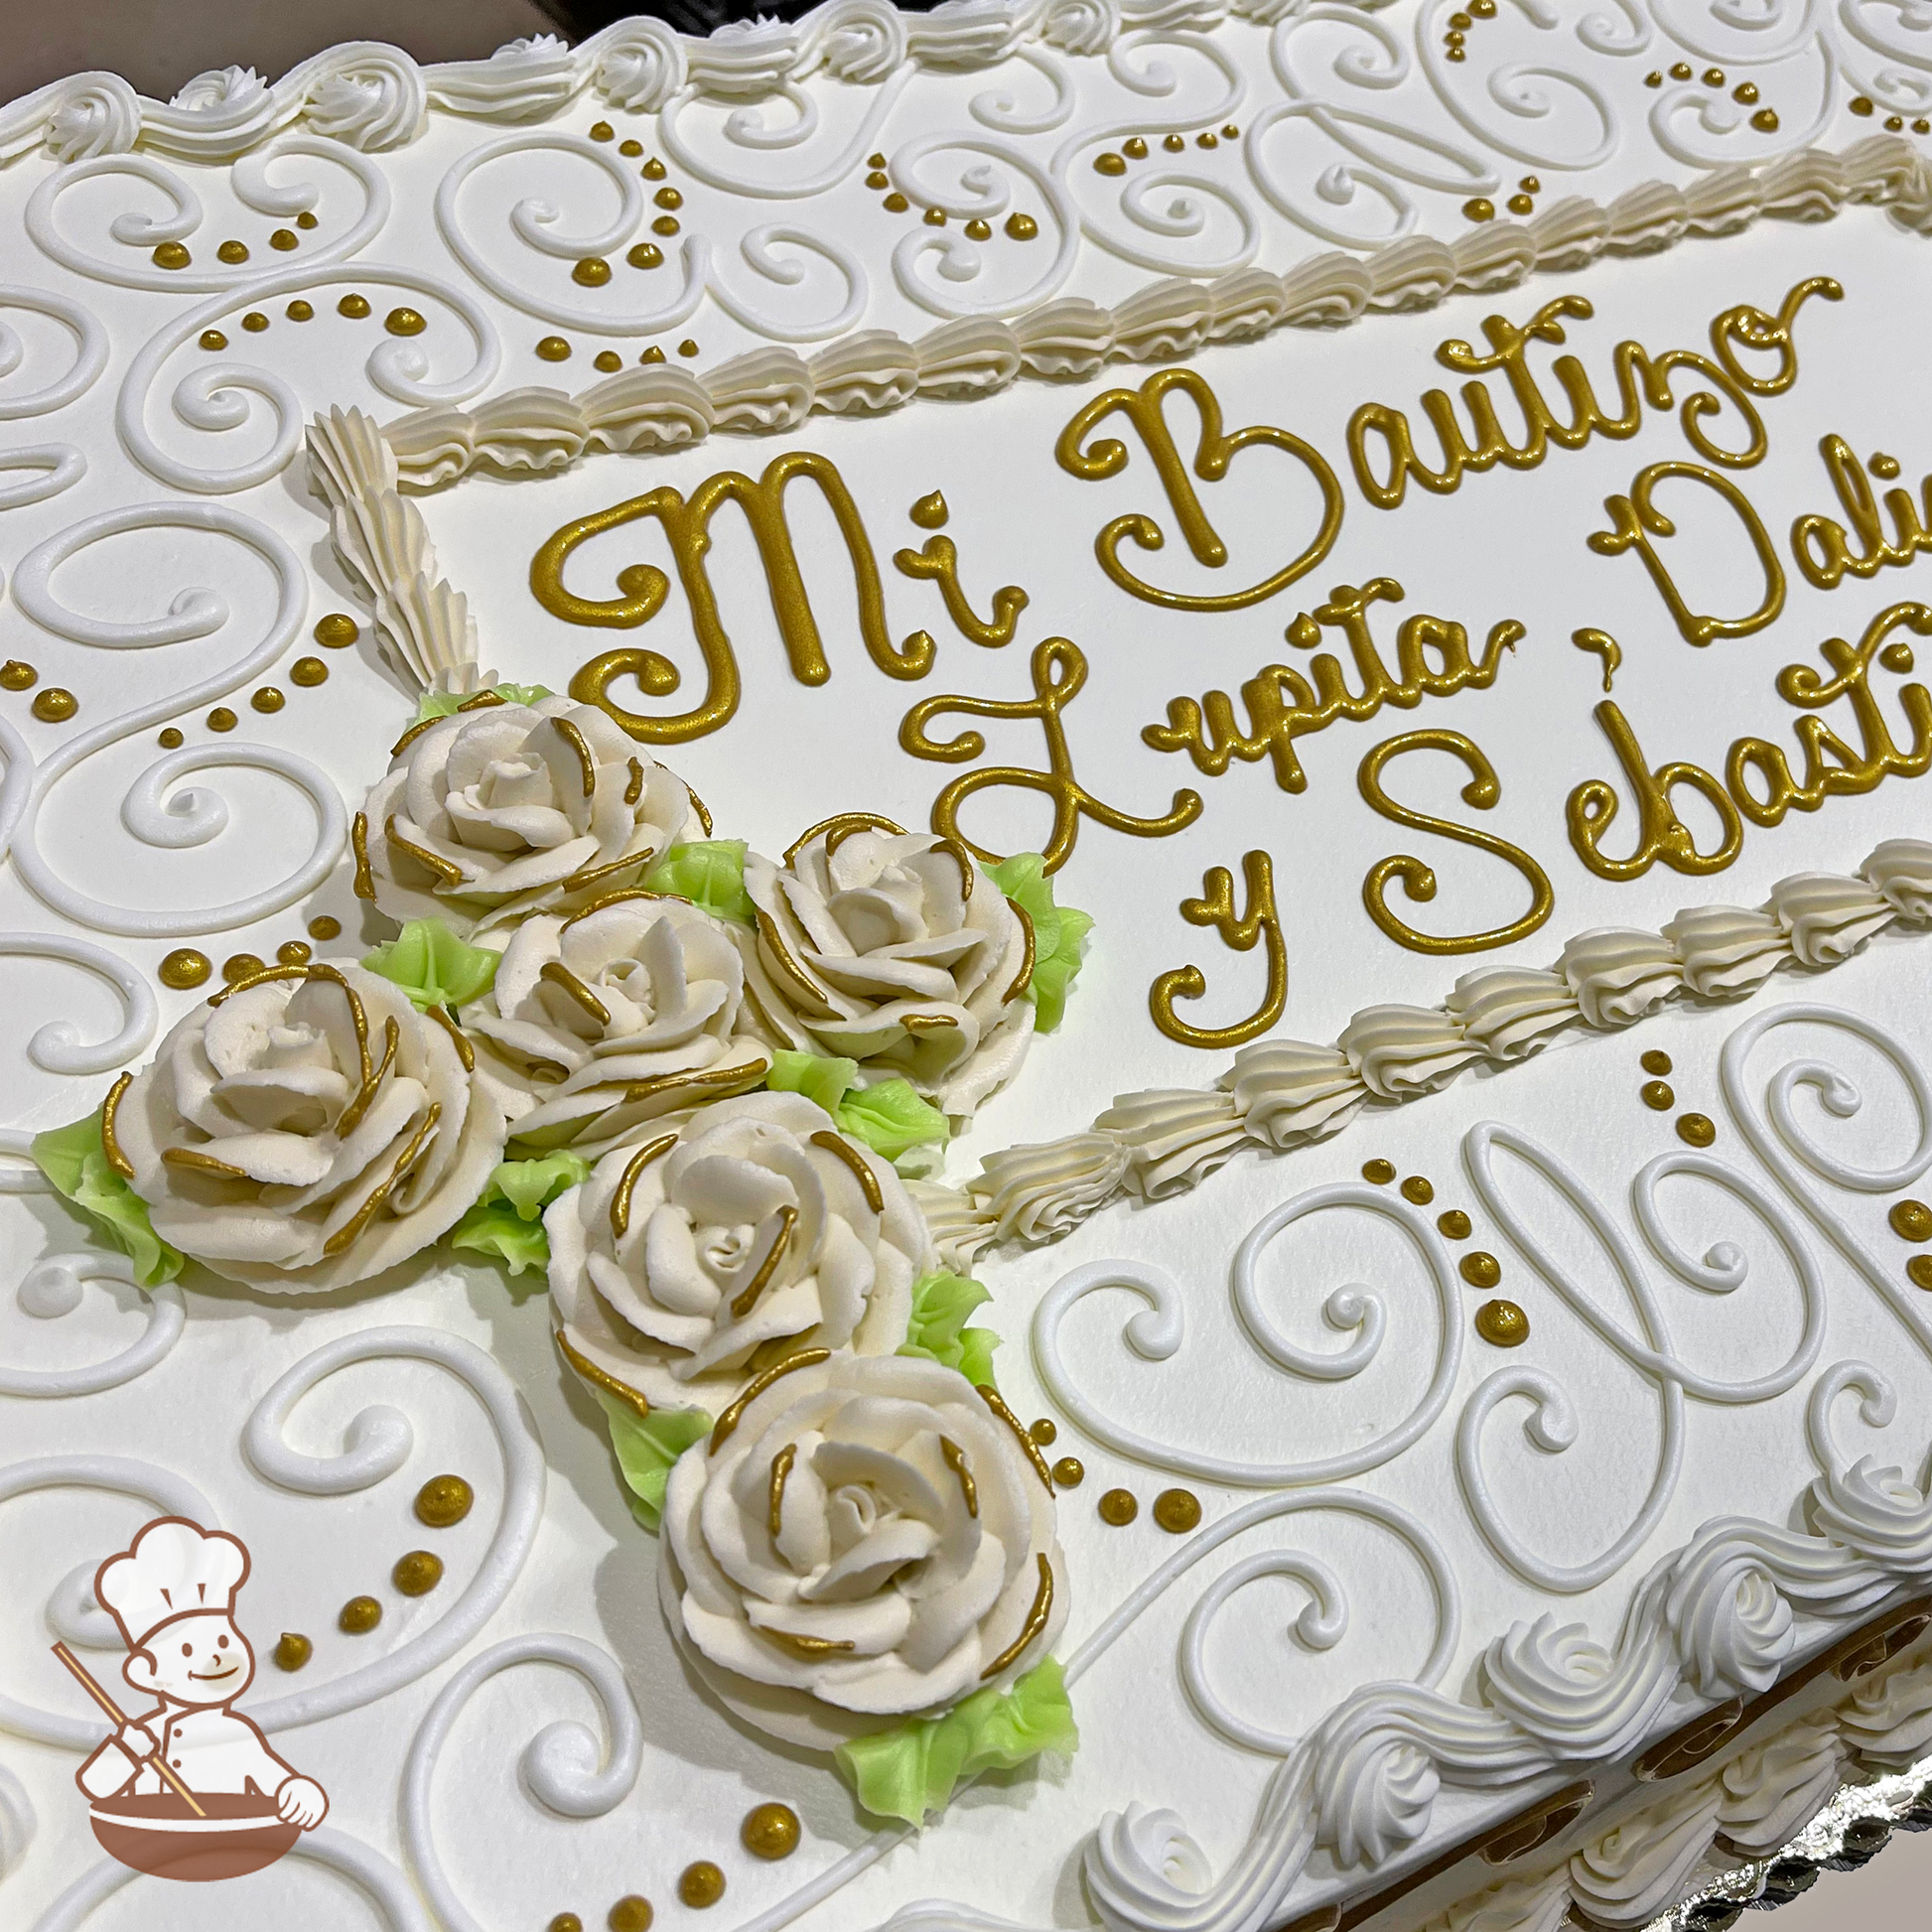 Baptism sheet cake with roses in a shape of a cross and scrolls with writing in gold piping inside a trimmed frame.